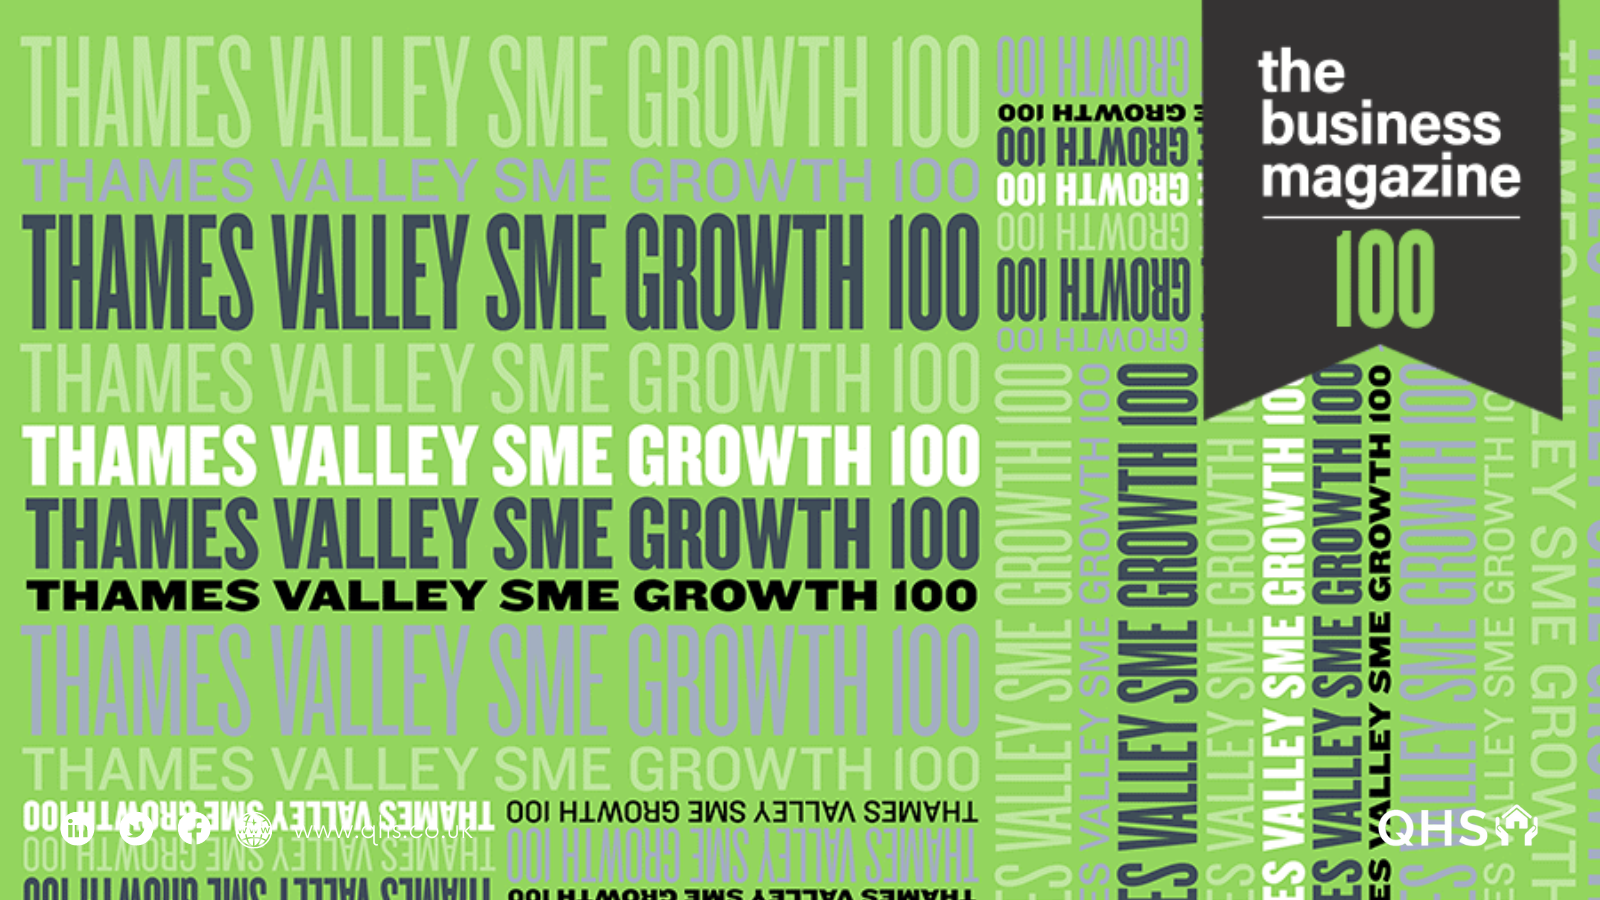 QHS recognised in Thames Valley SME Growth 100 index 